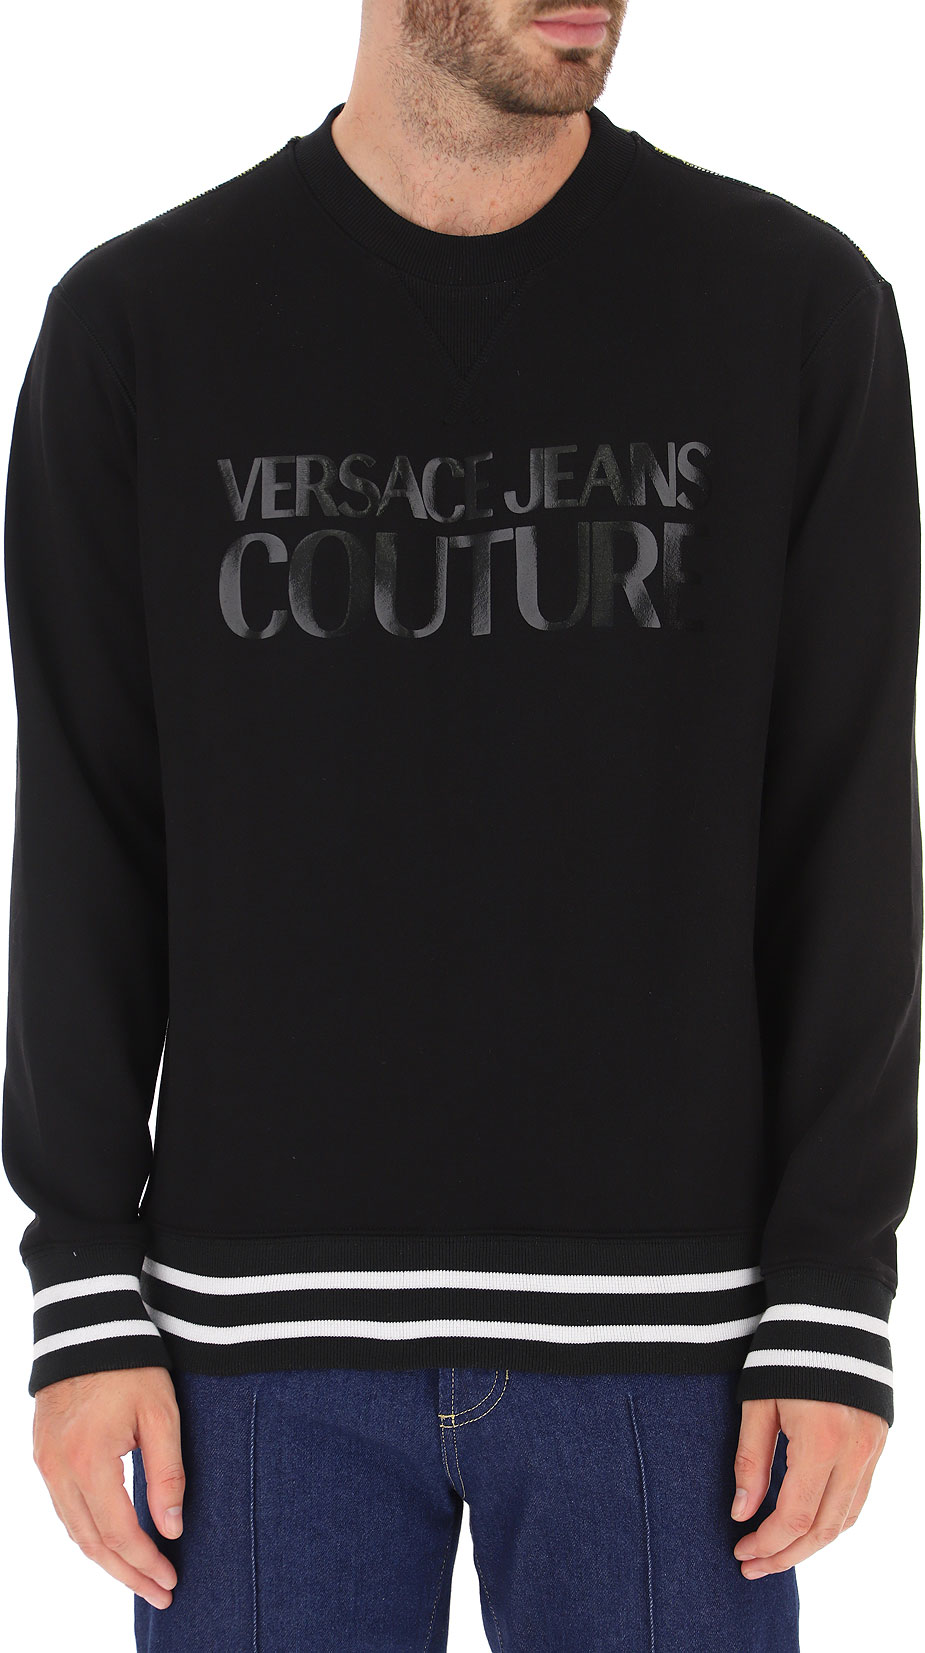 Mens Clothing Versace Jeans Couture , Style code: b7gza702-13988-899